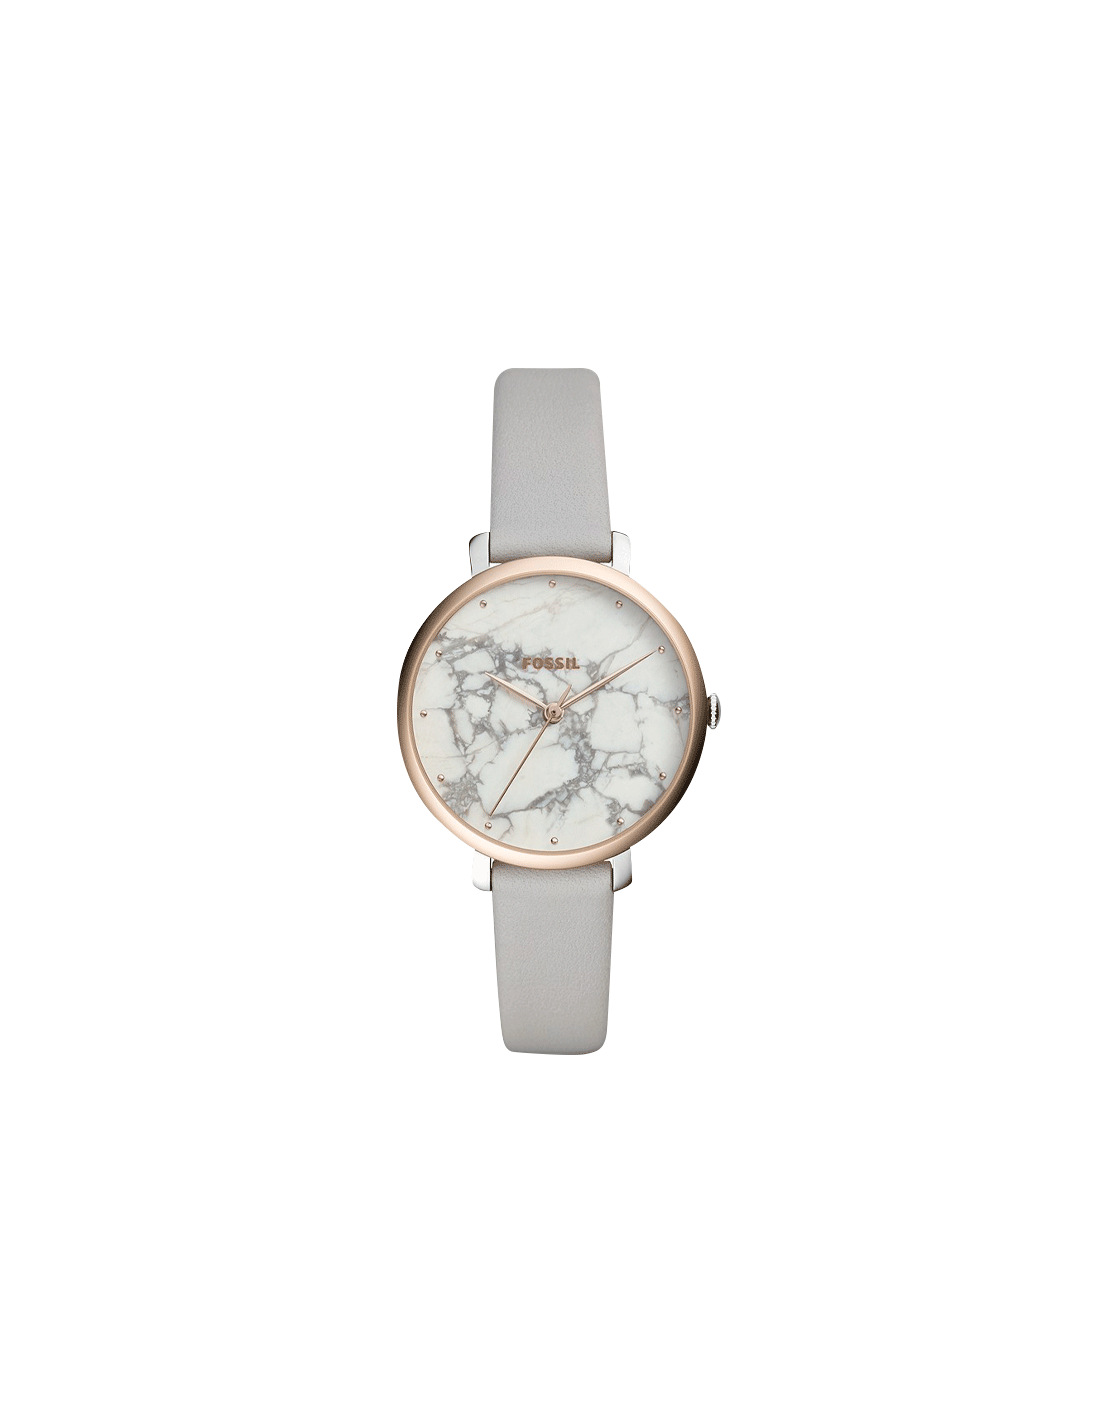 Jacqueline Watch (Rose-Gold/Grey) | Fossil | Luby 